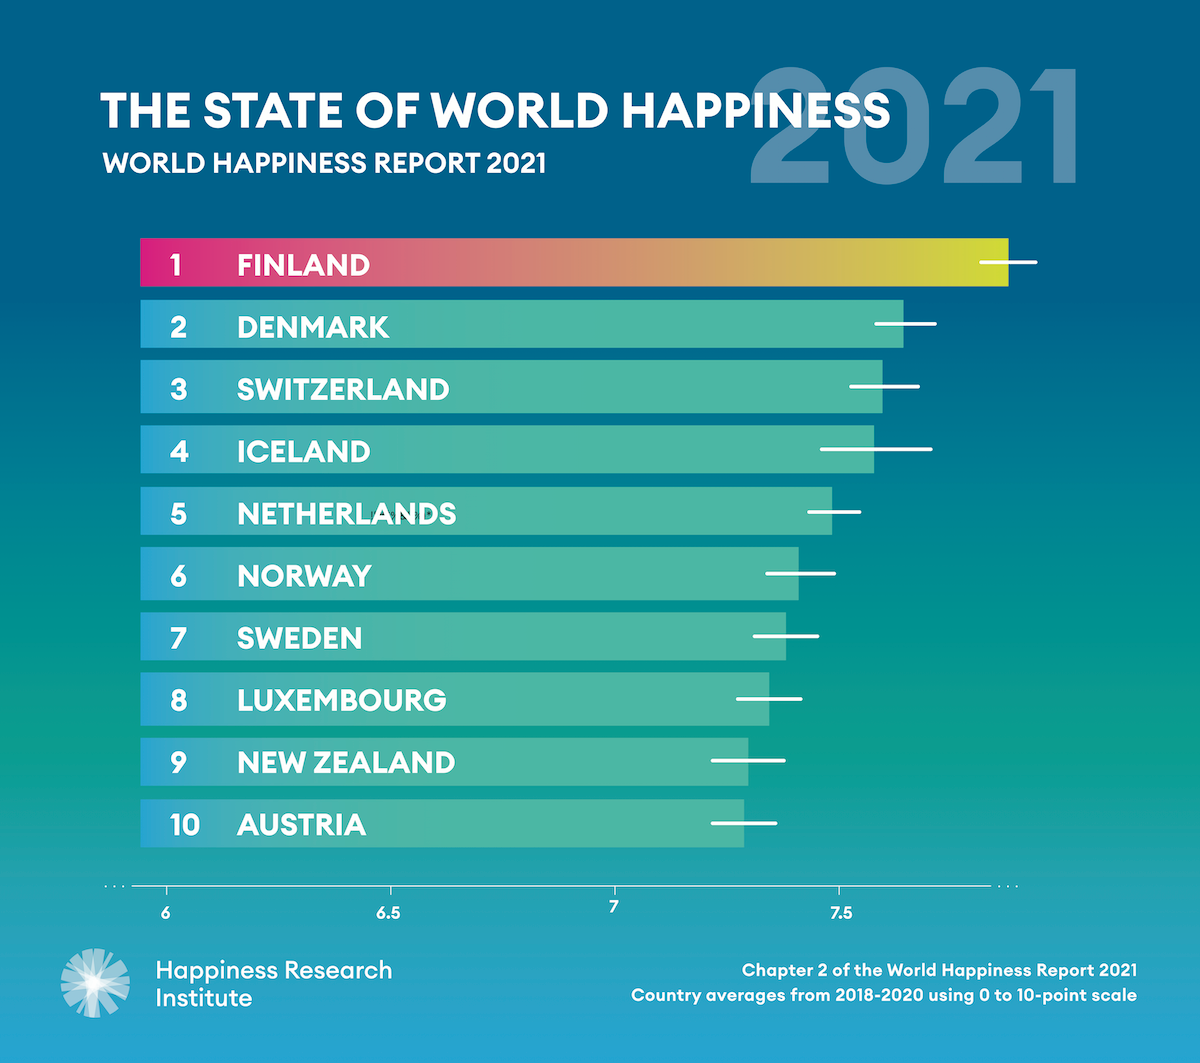 World Happiness Report 2021 top 10 countries